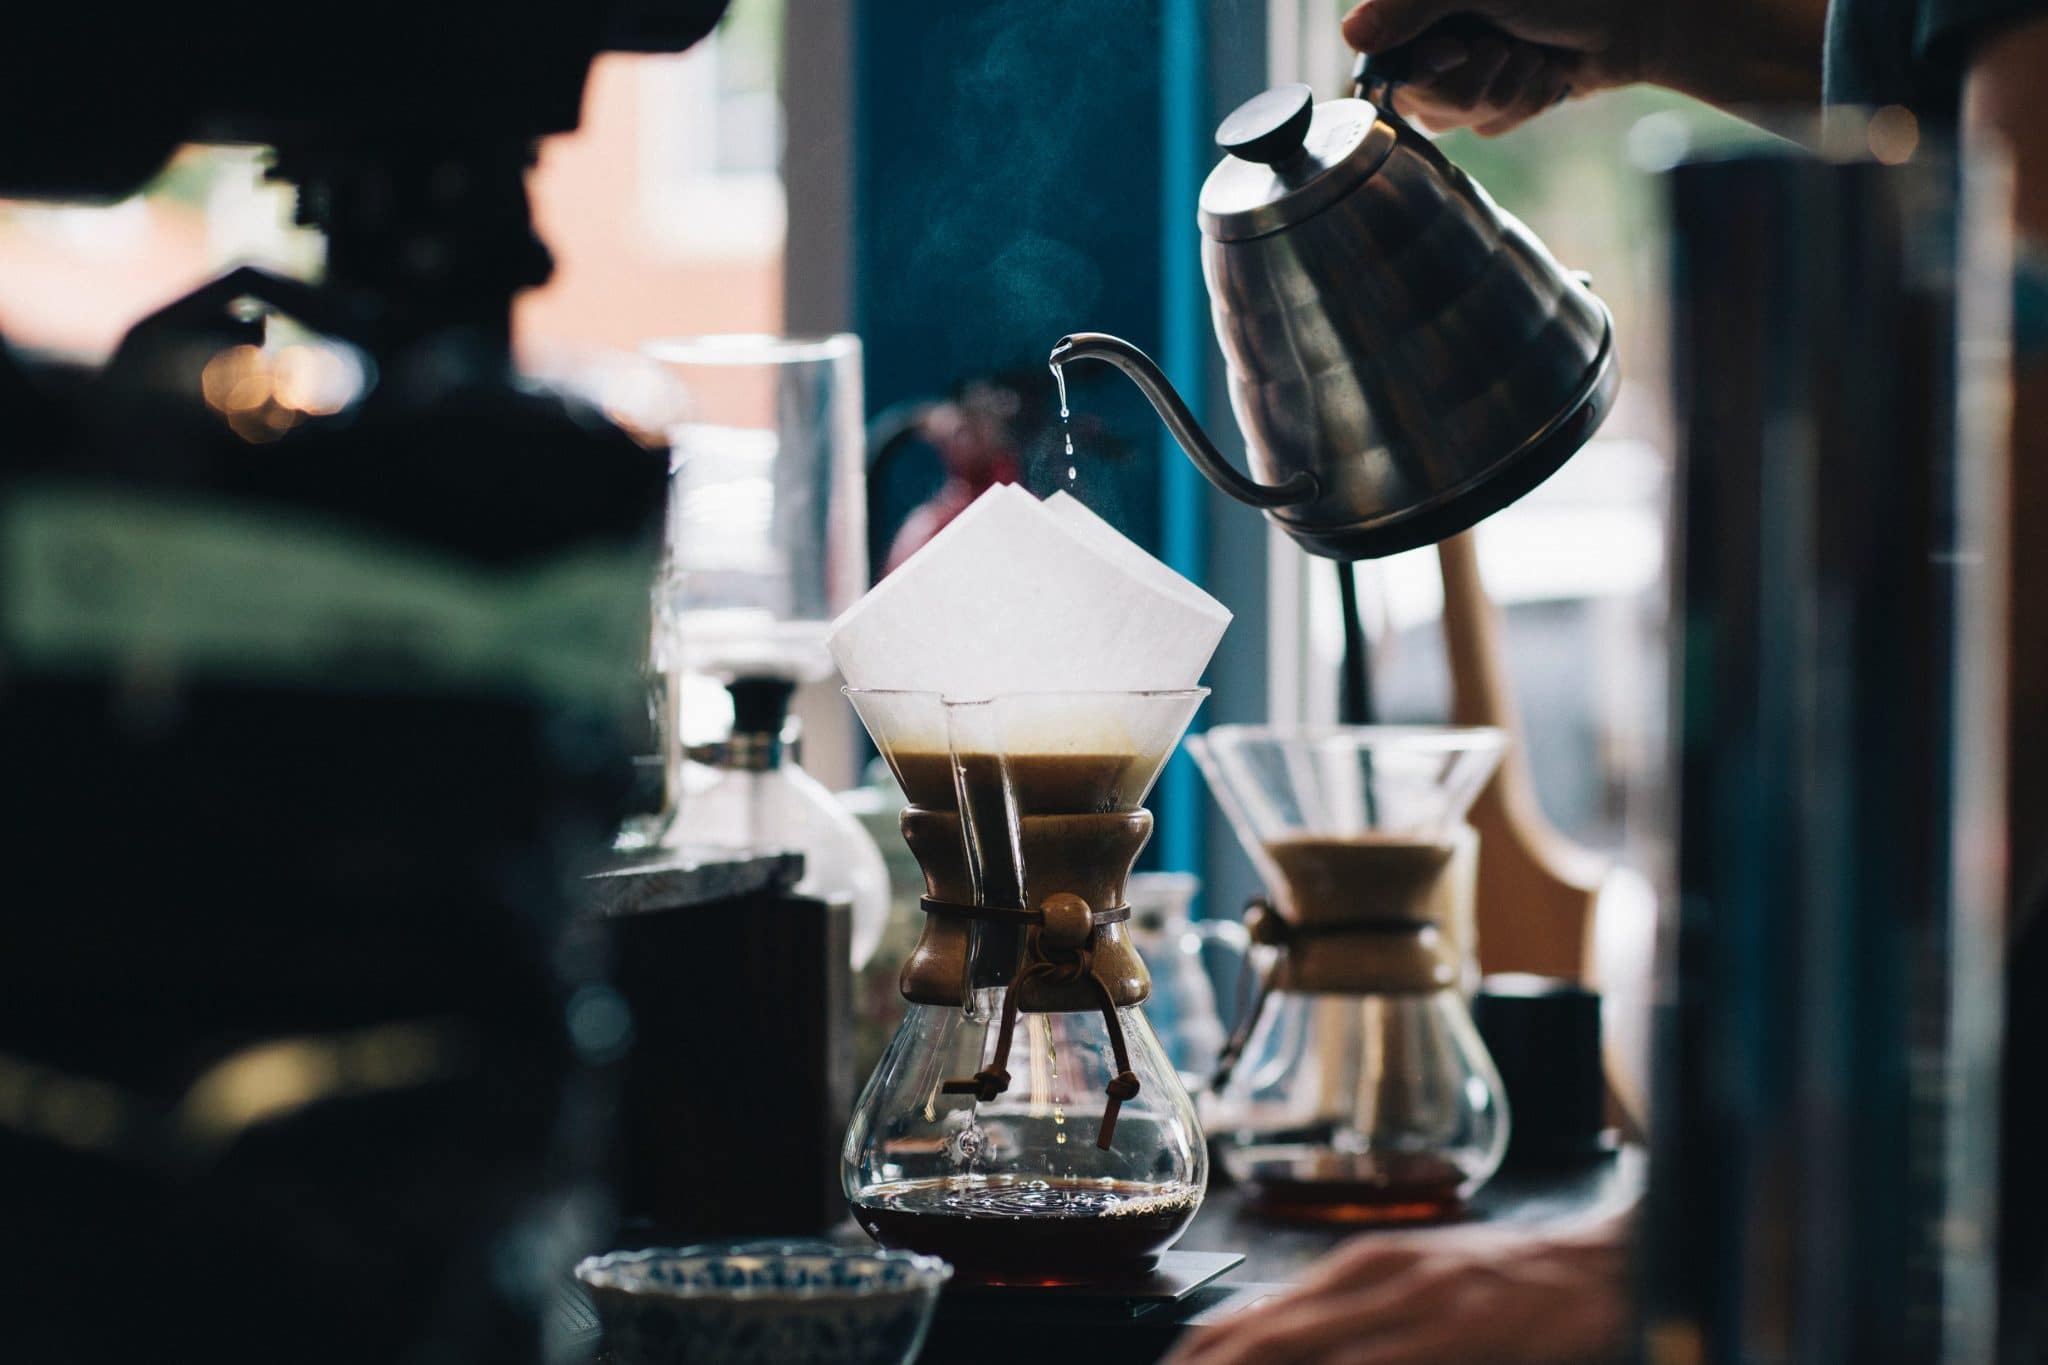 Qualities you need to look for in a coffee supplier